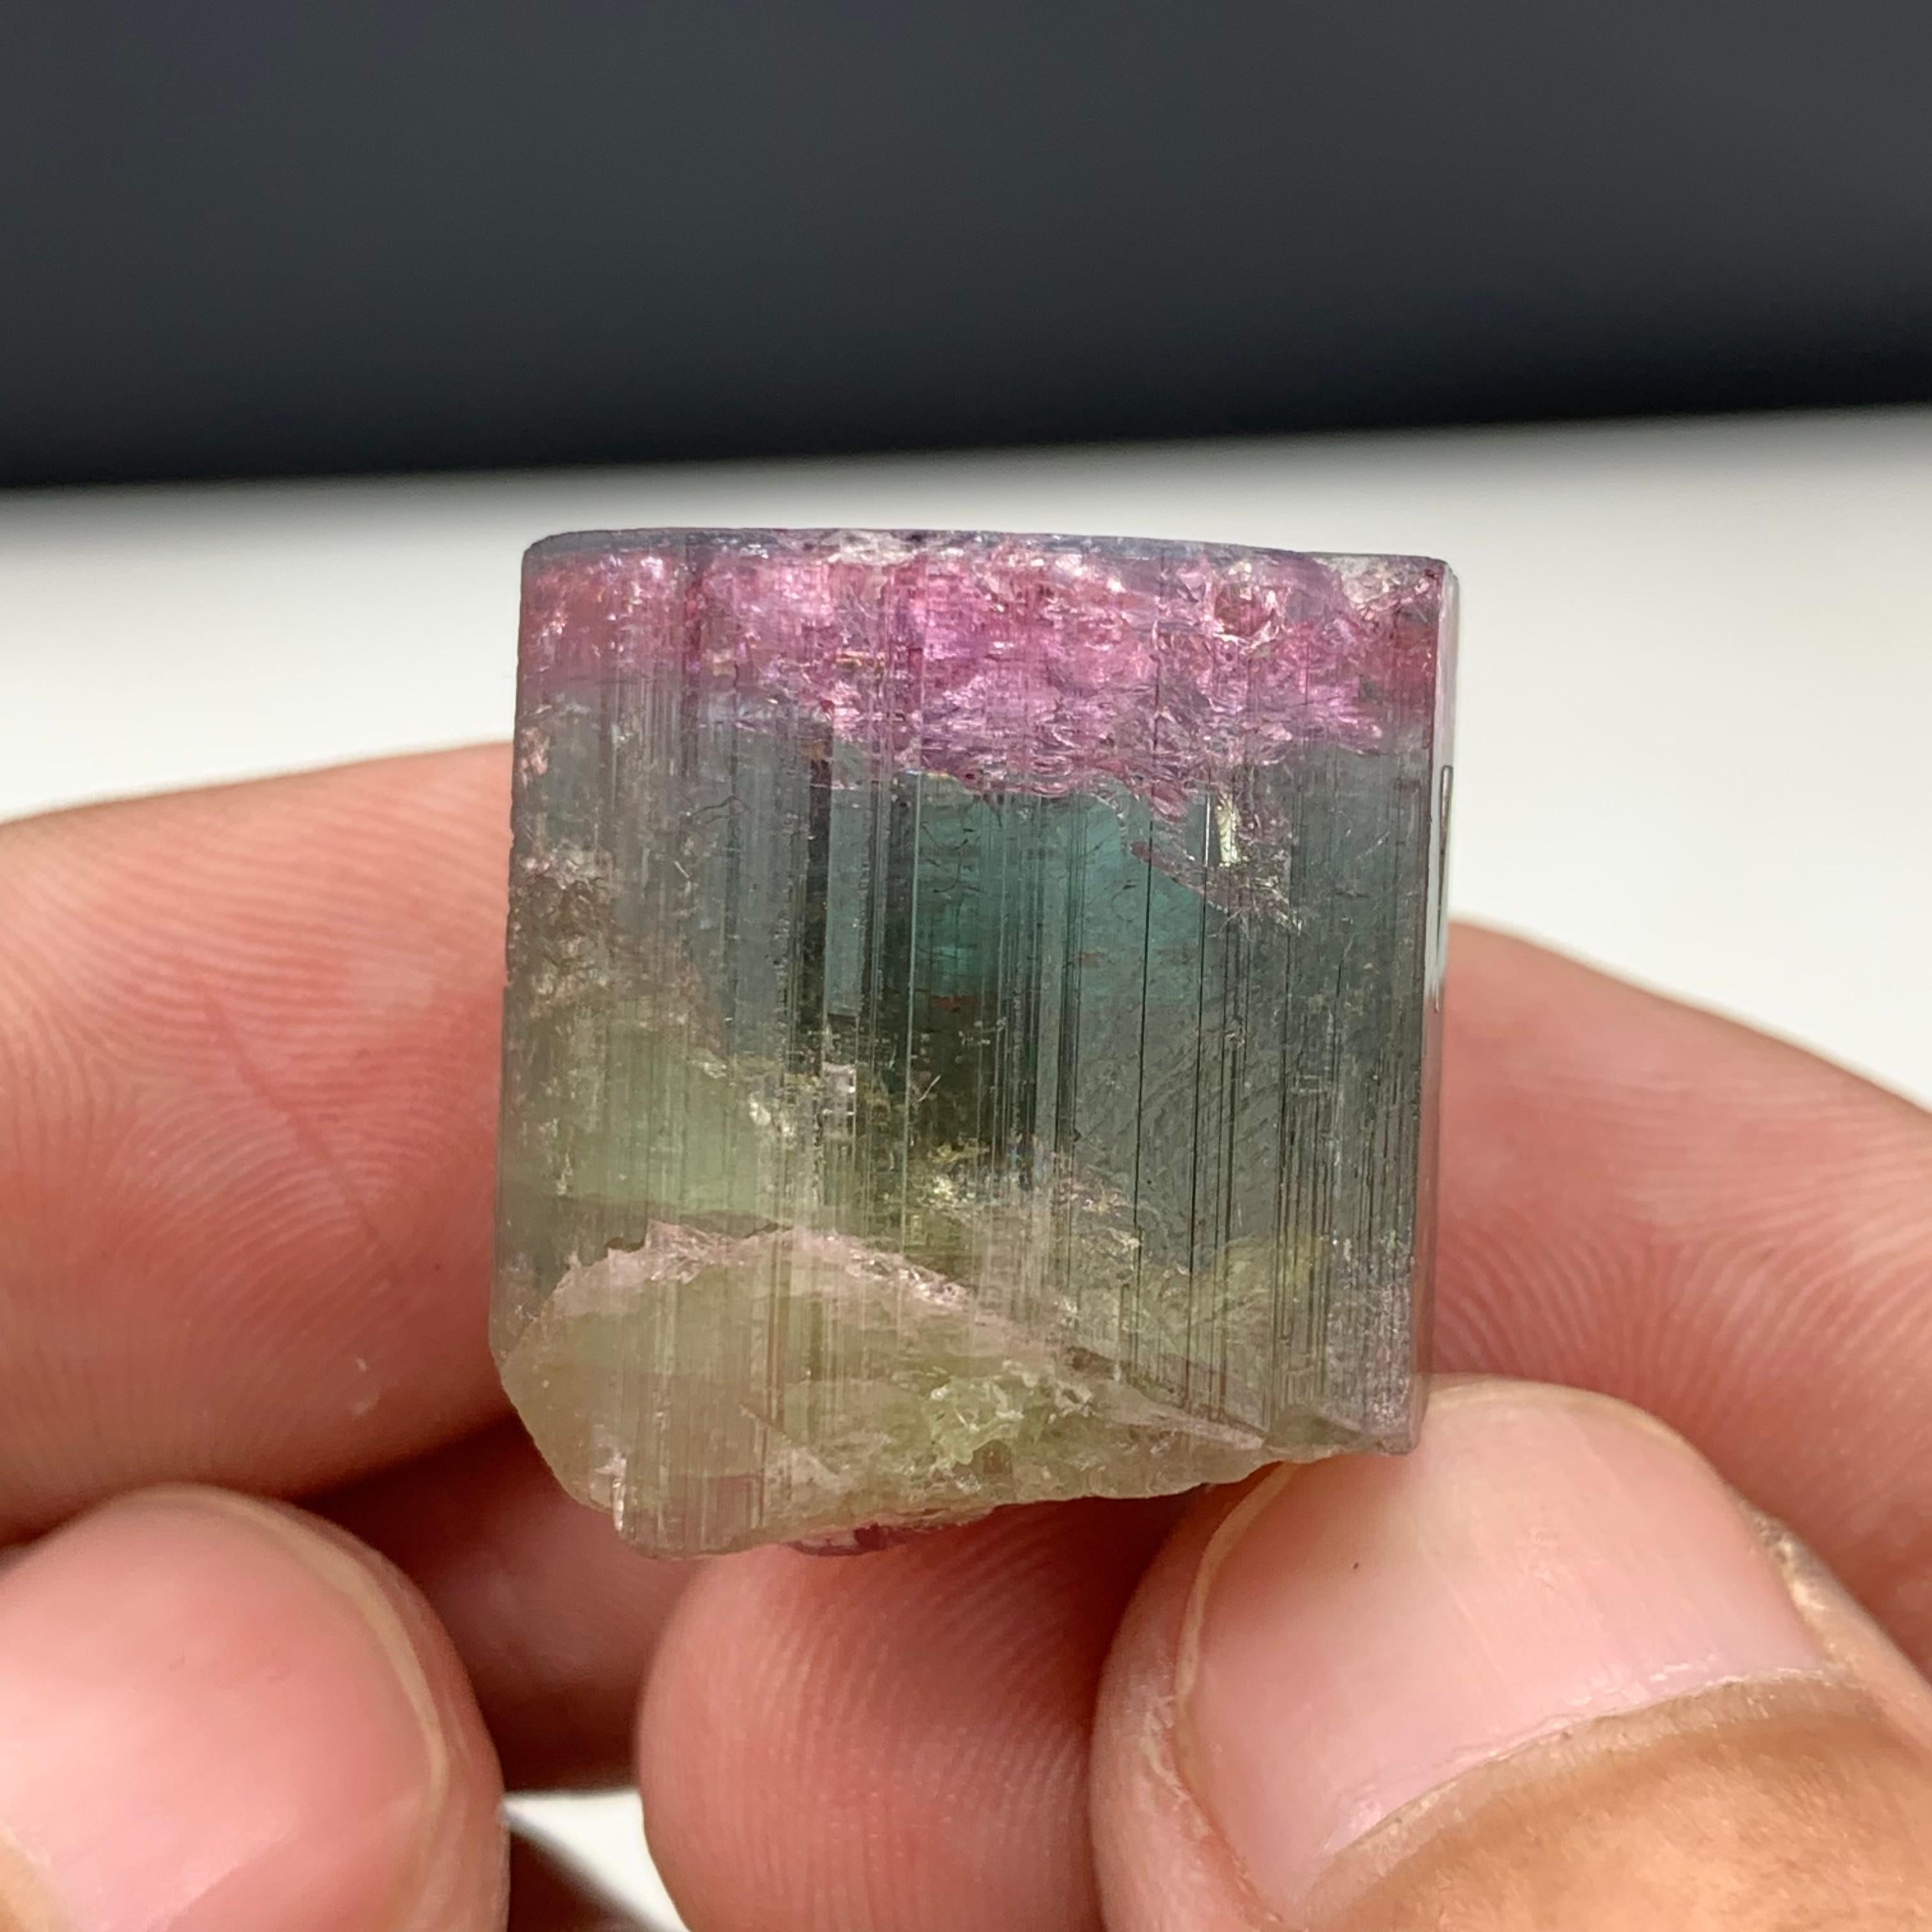 90.50 Carat Beautiful Tri Color Tourmaline Crystal From Afghanistan 
Weight: 90.50 carat 
Dimension: 2.2 x 2.4 x 1.9 Cm
Origin : Afghanistan 
Color: Pink , Green and Orange 

Tourmaline is a crystalline silicate mineral group in which boron is